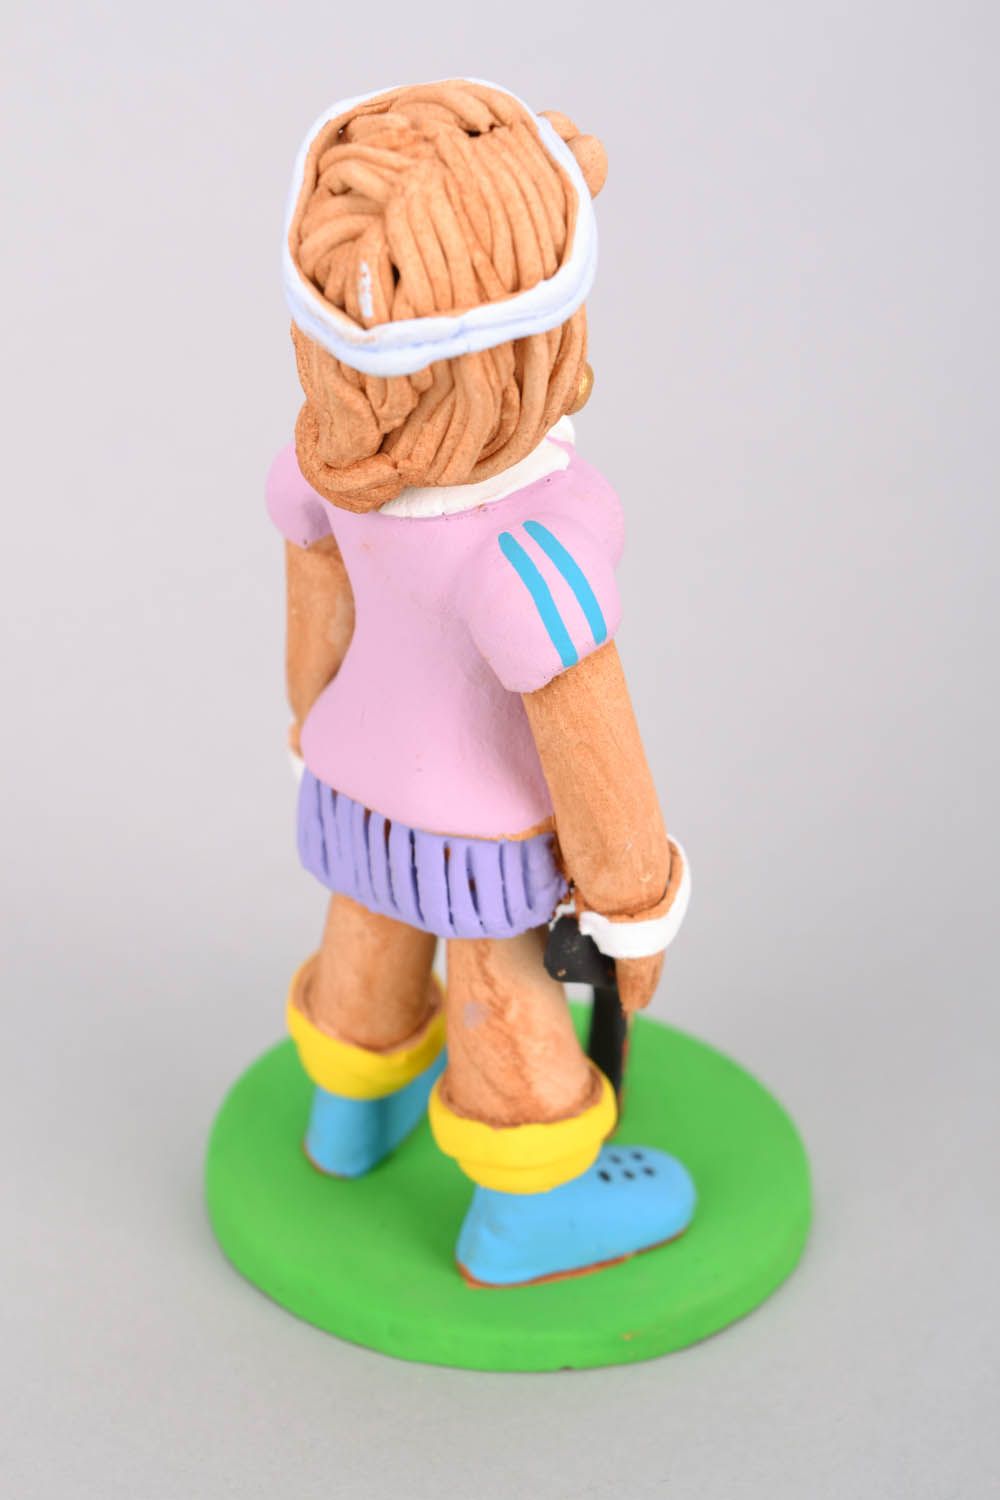 Figurine Tennis Player with a Racket photo 5